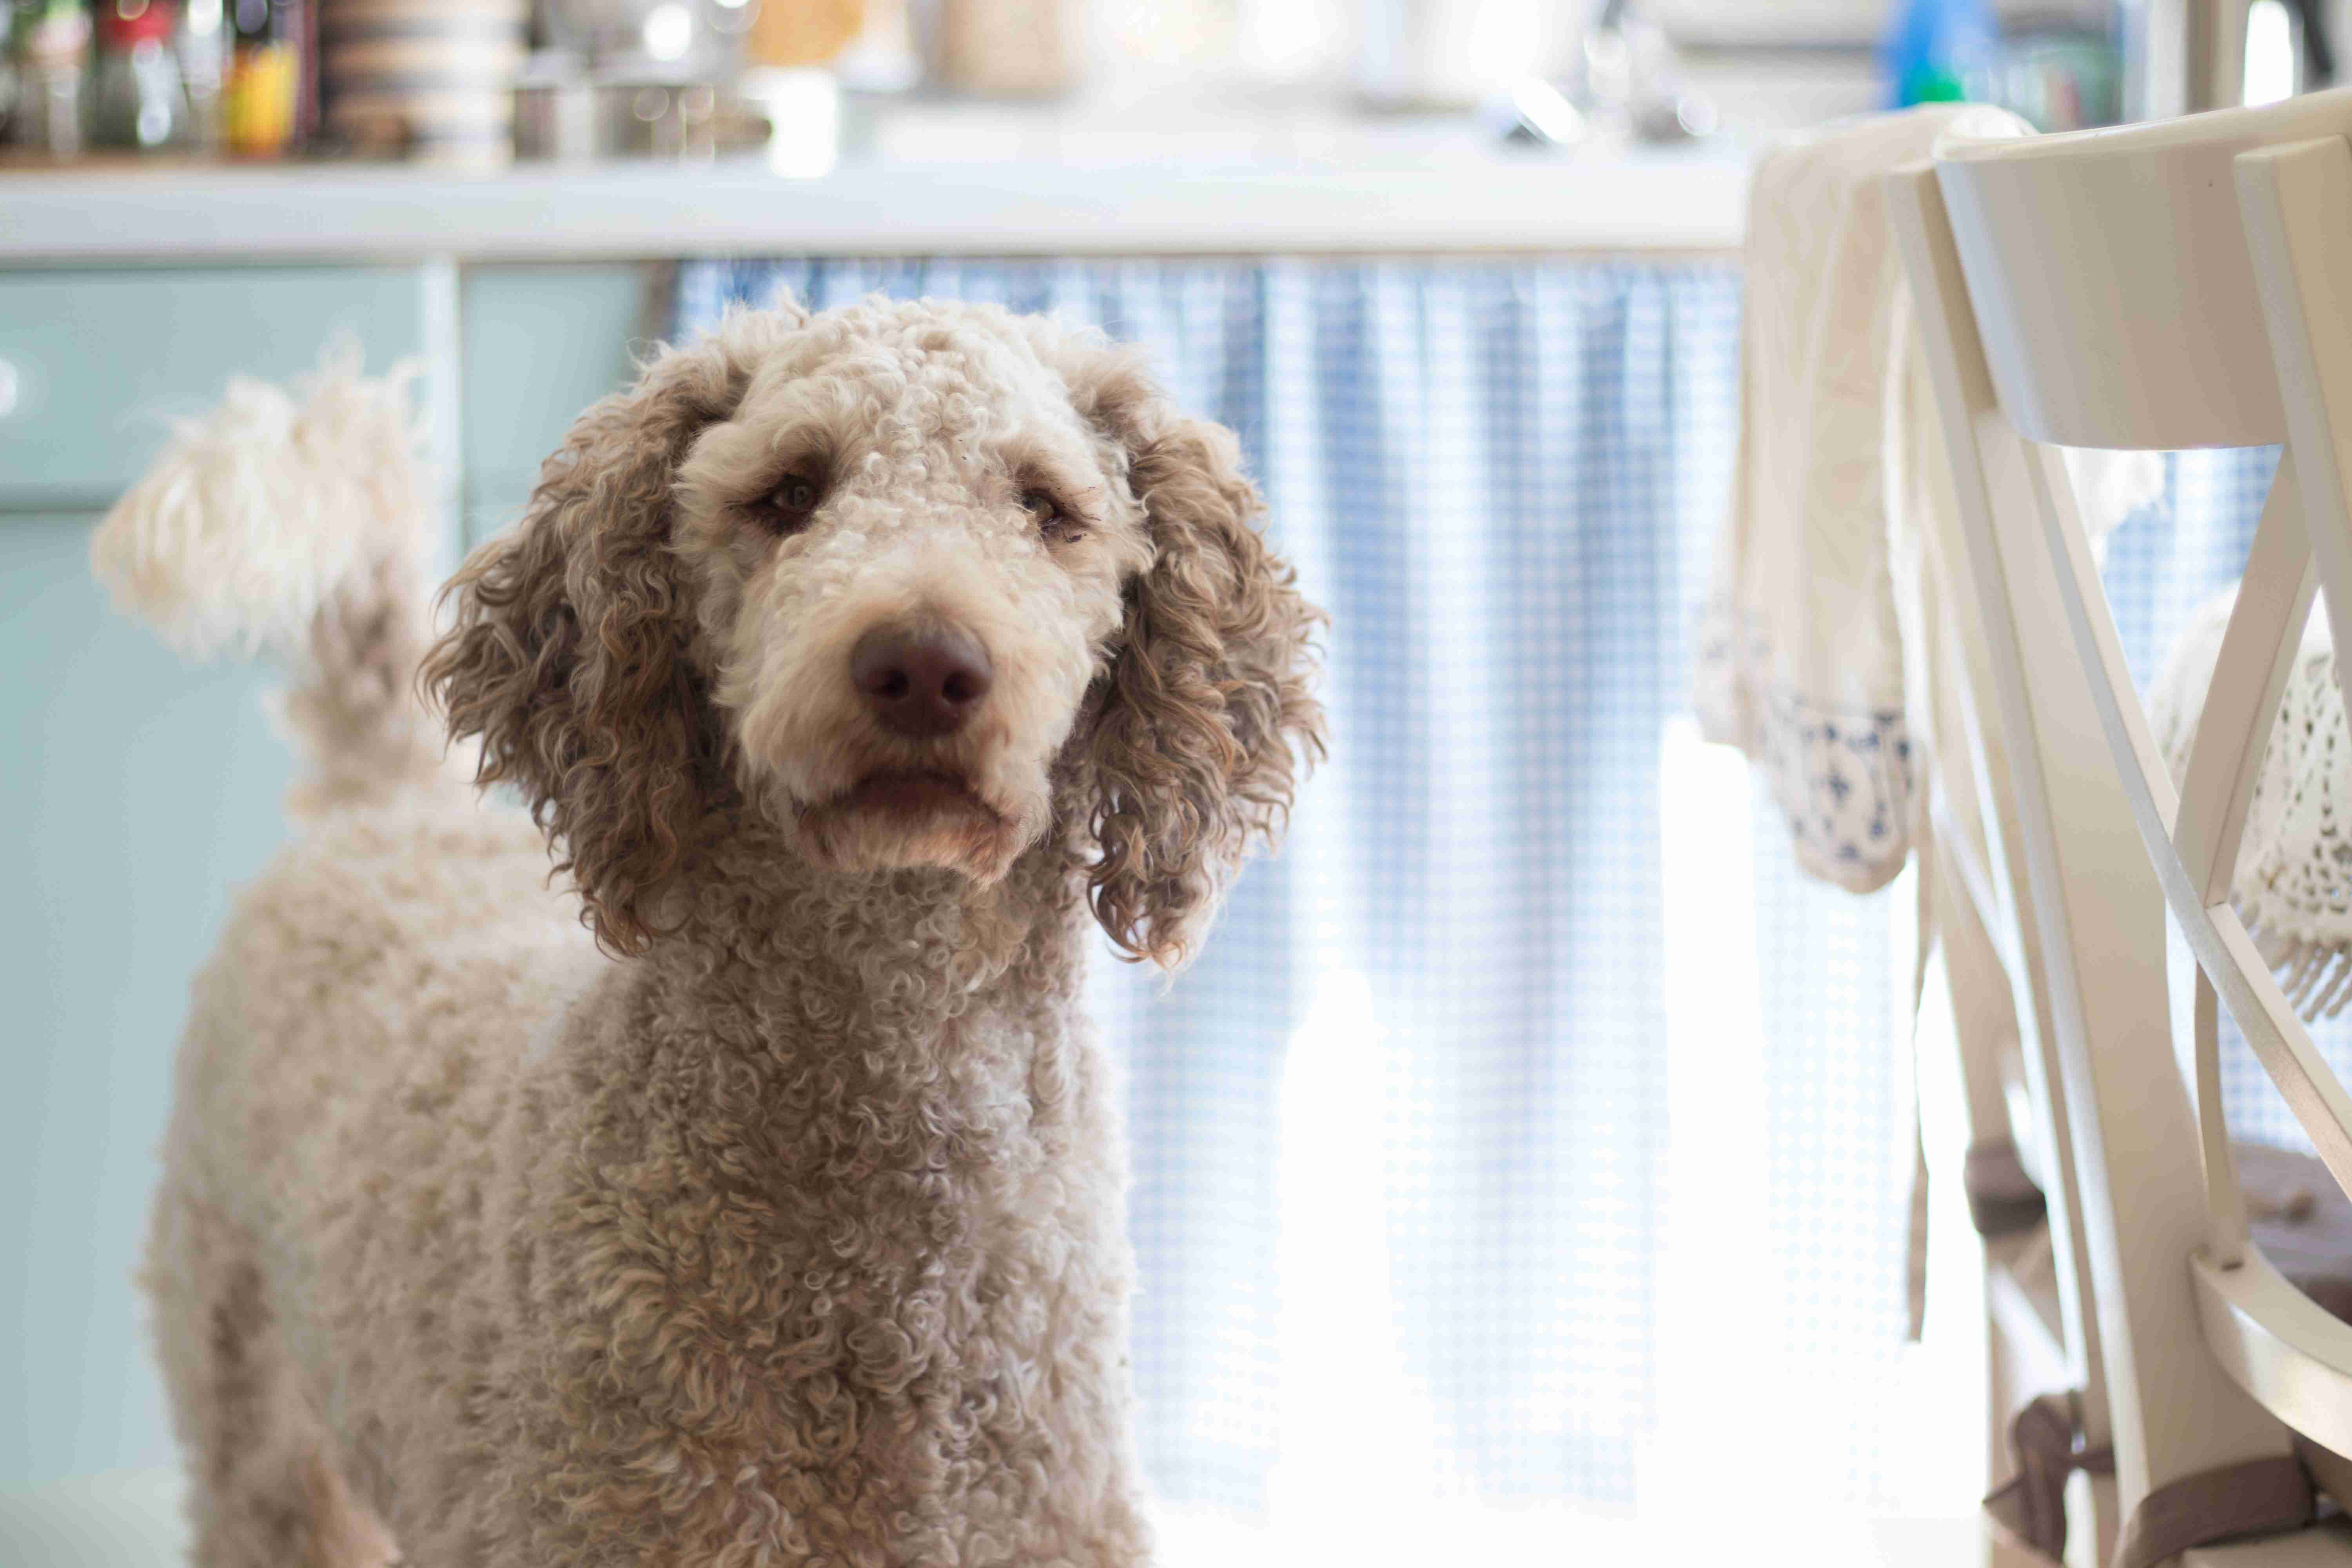 How did you handle any instances of separation anxiety from your Poodle puppy?